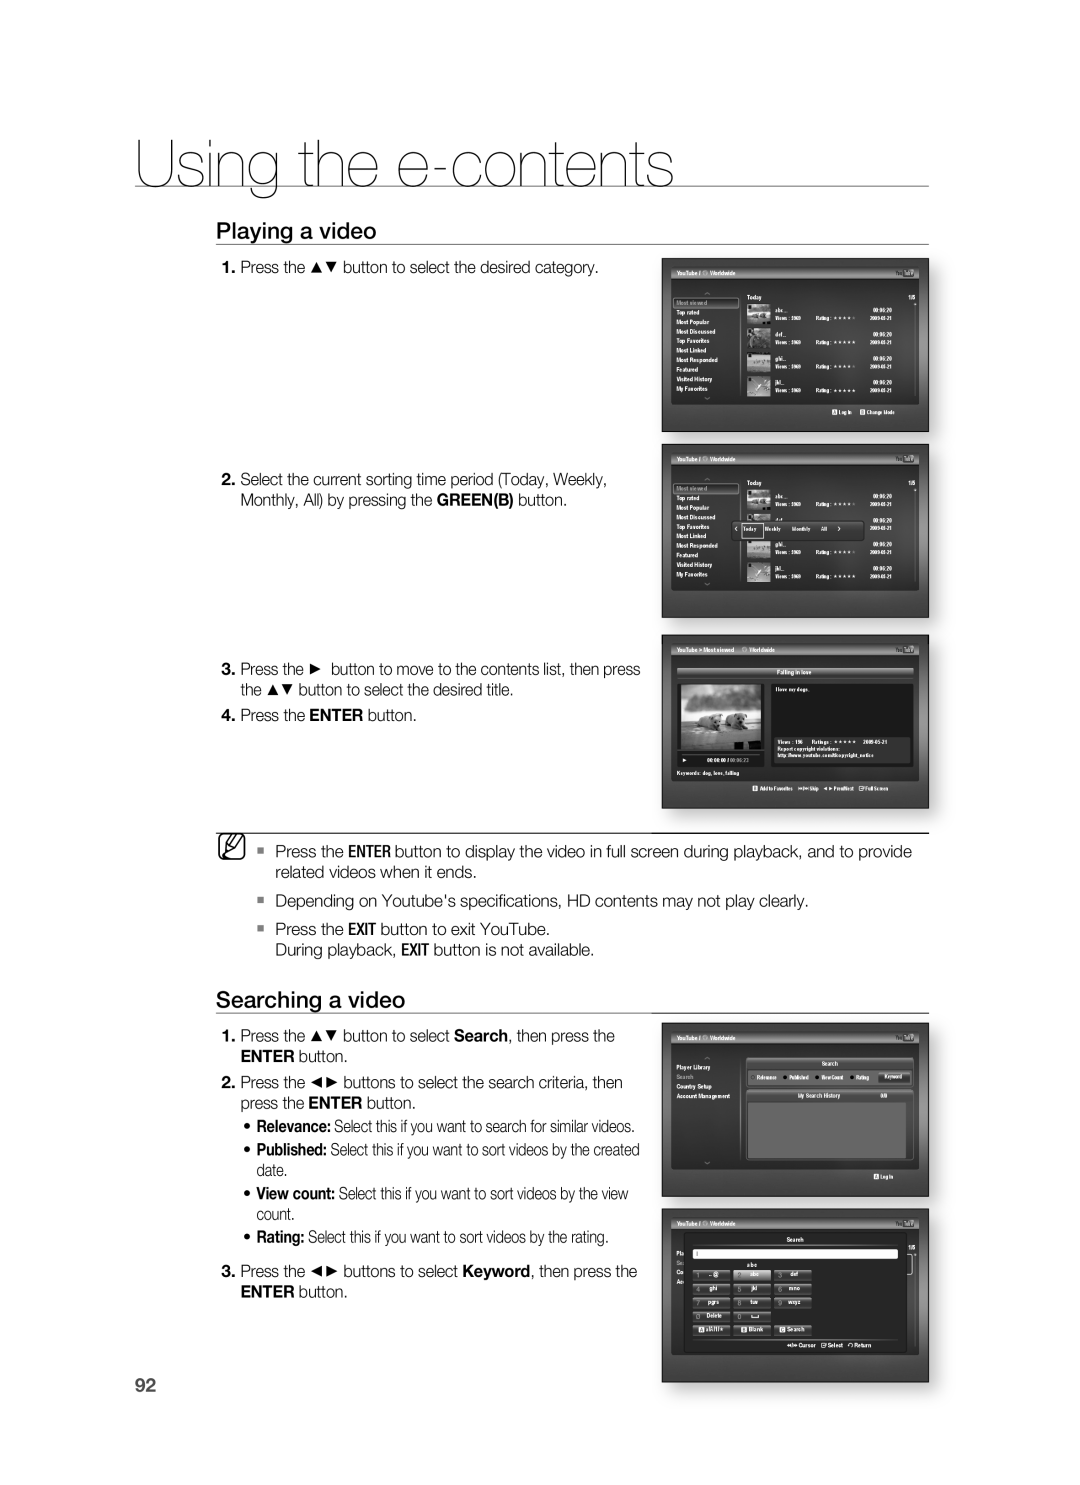 Samsung AH68-02231A, HT-BD3252A user manual Playing a video, Searching a video, Using the e-contents 